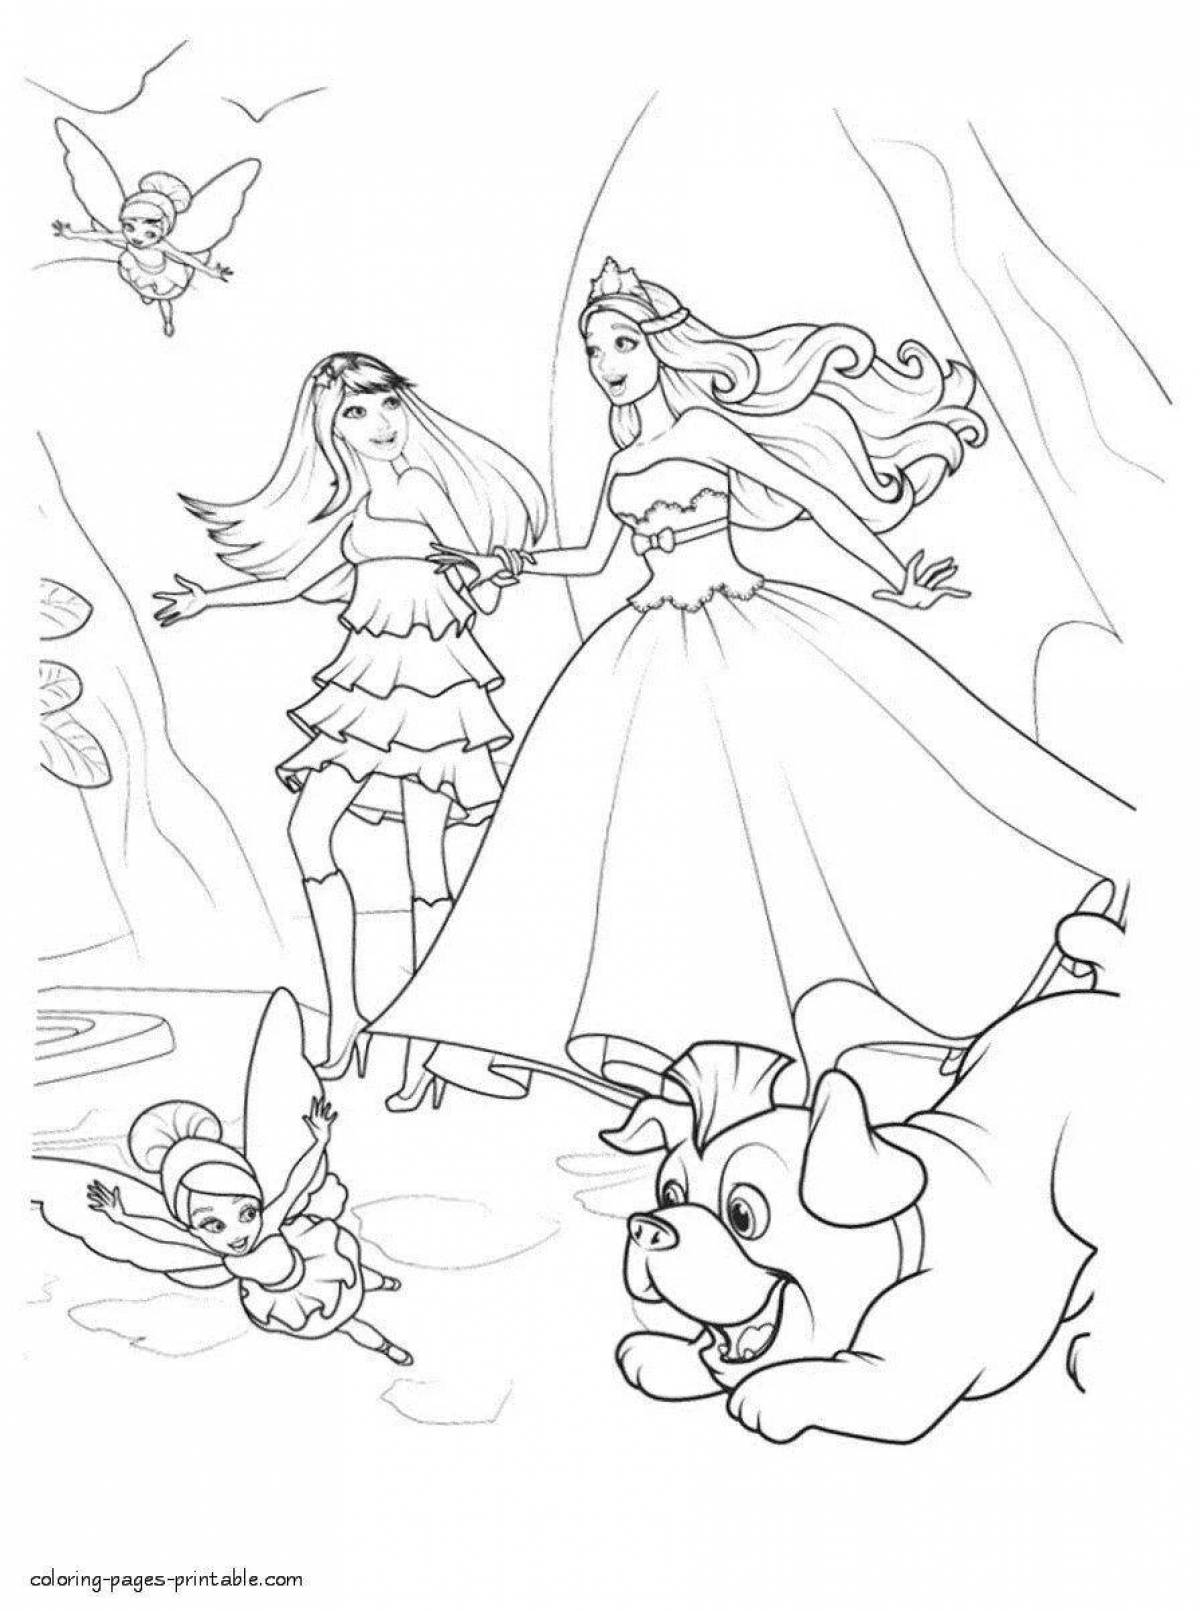 Great coloring page include princesses